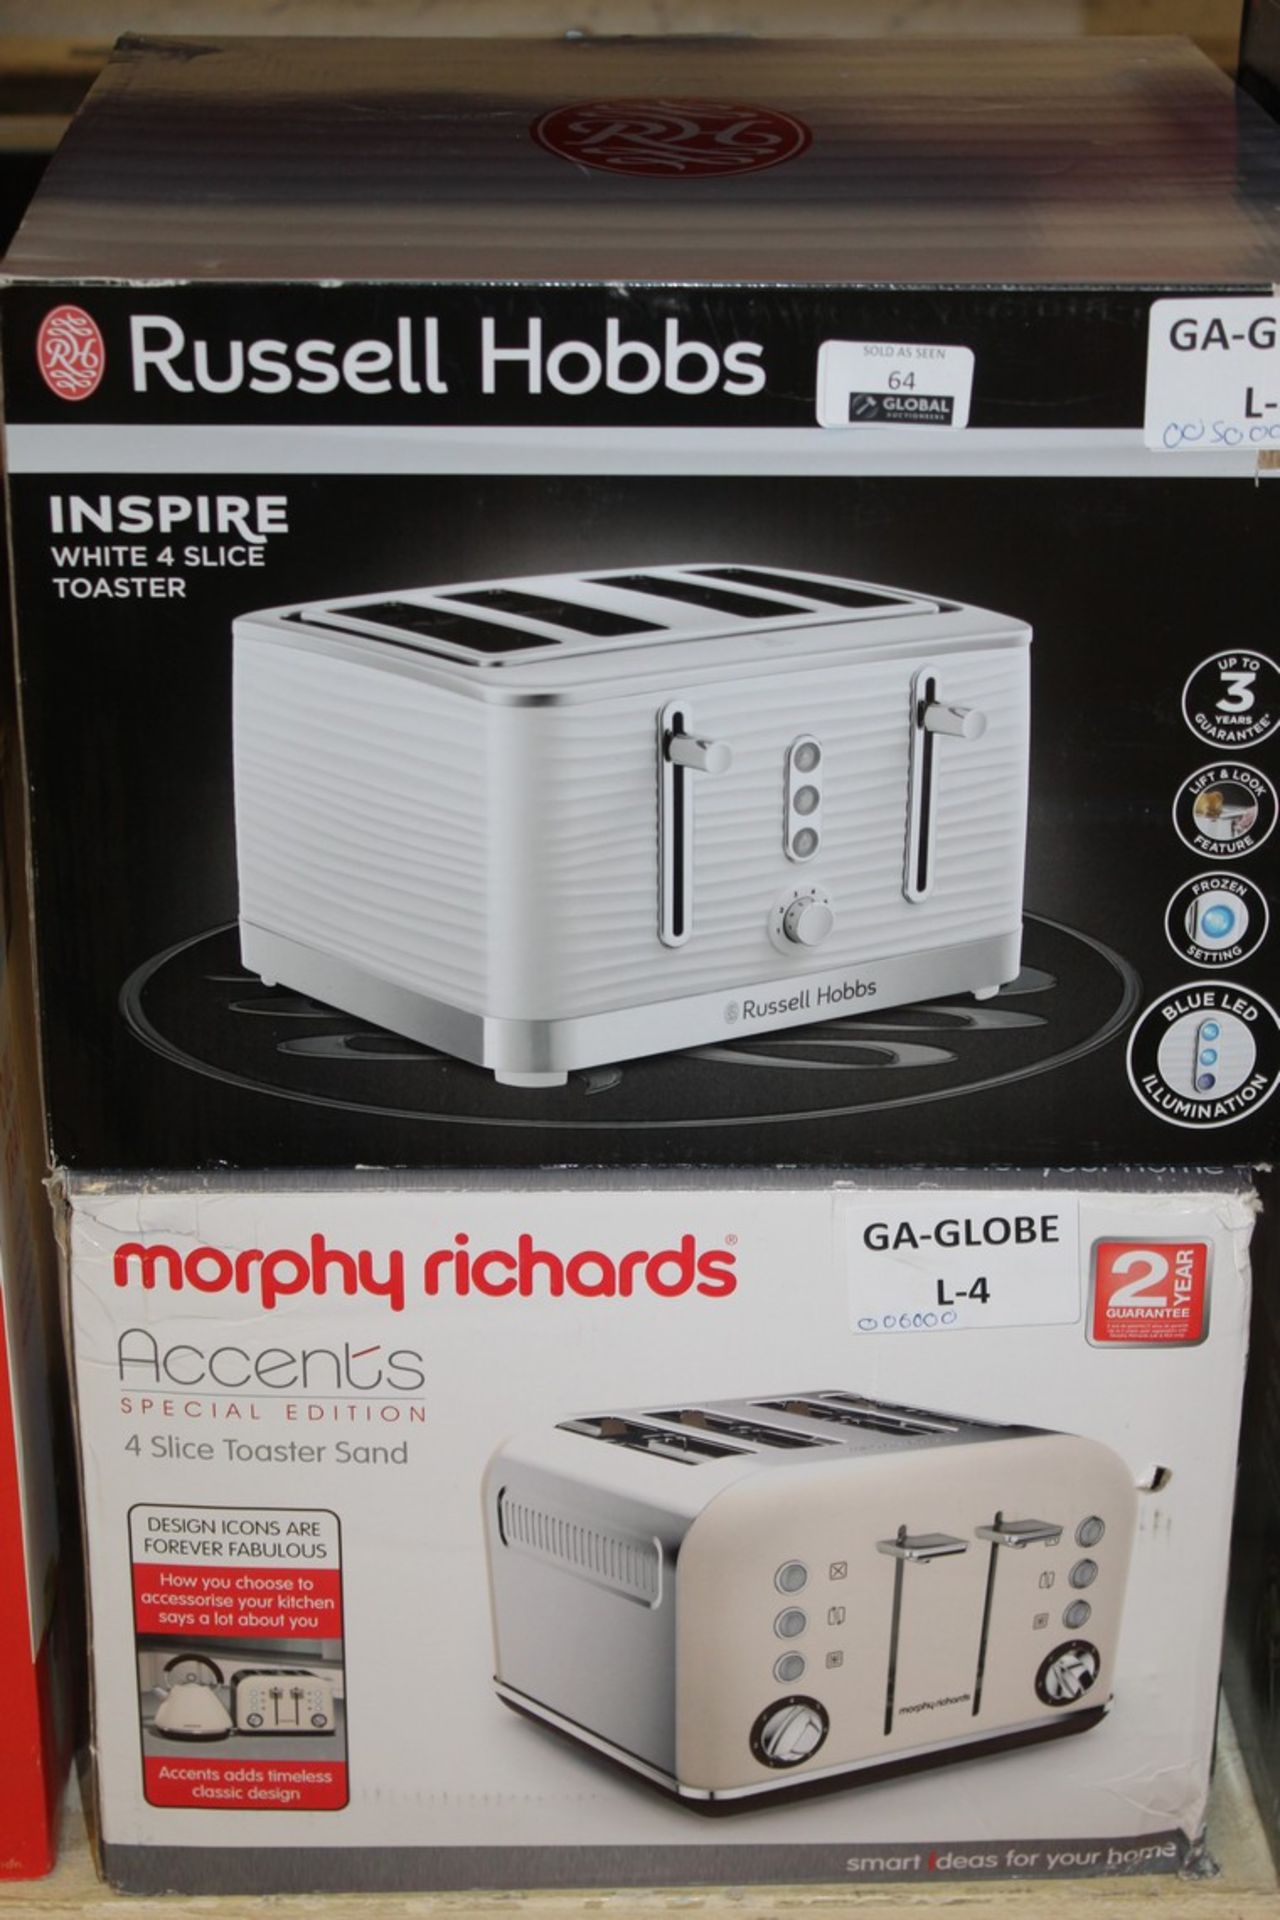 Boxed Morphy Richards Accents Special Edition 4 Sl